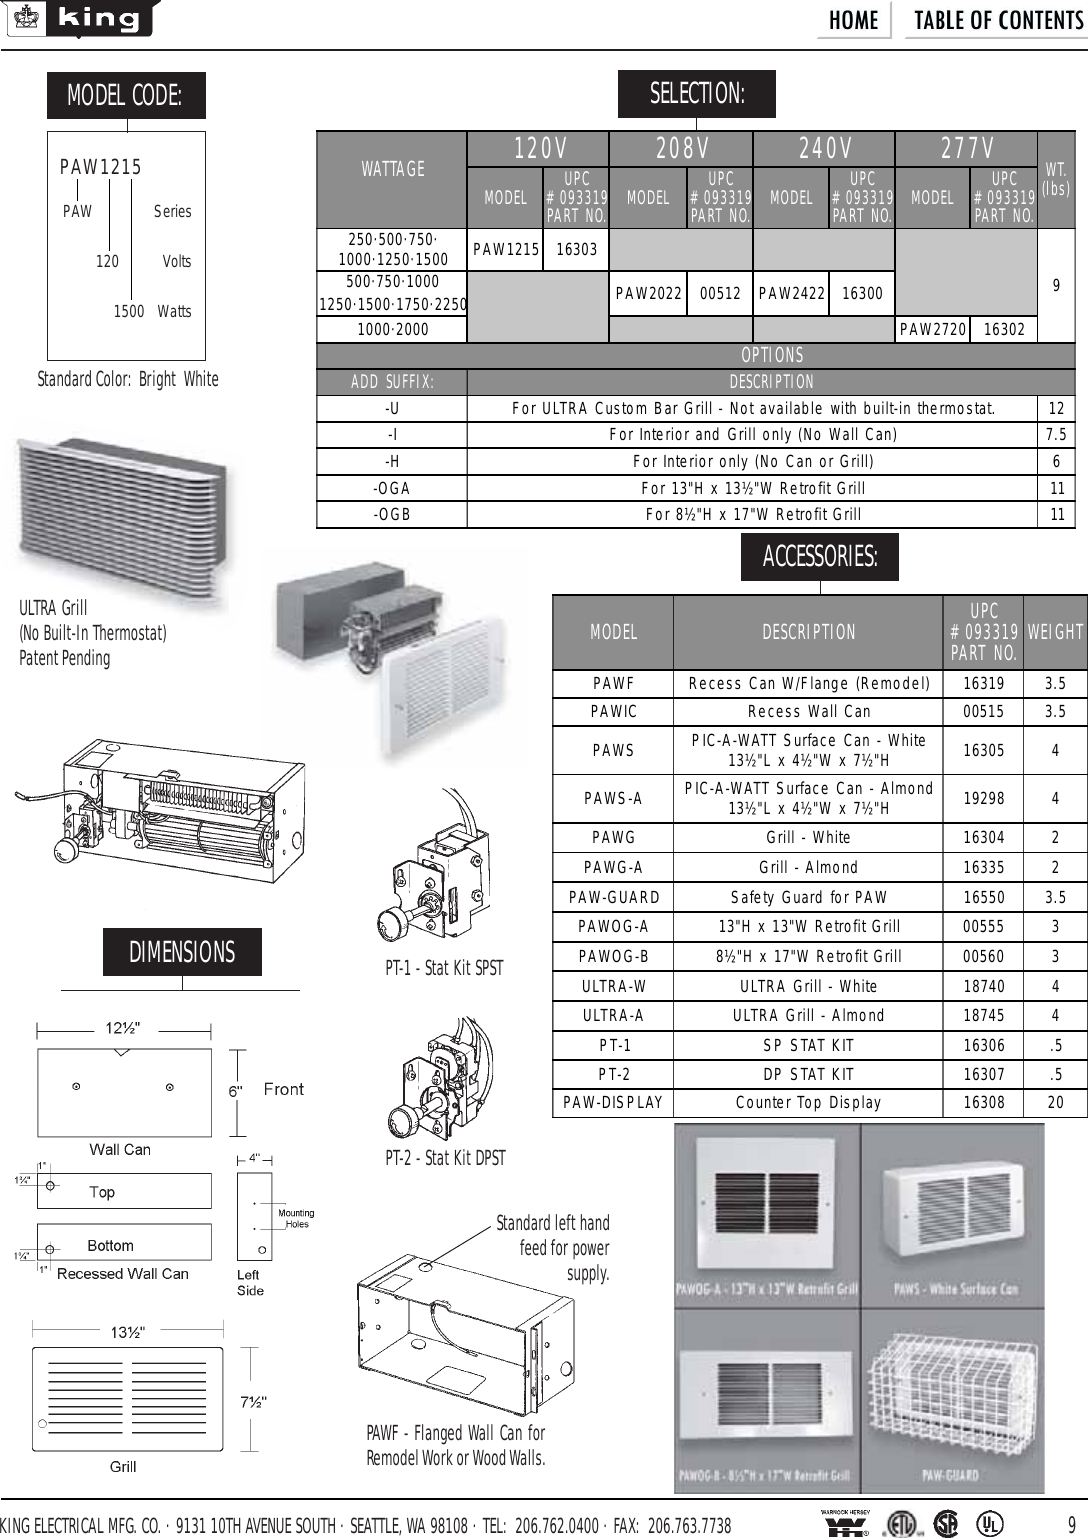 Page 1 of 2 - King Factory On A Disc - Product Catalog